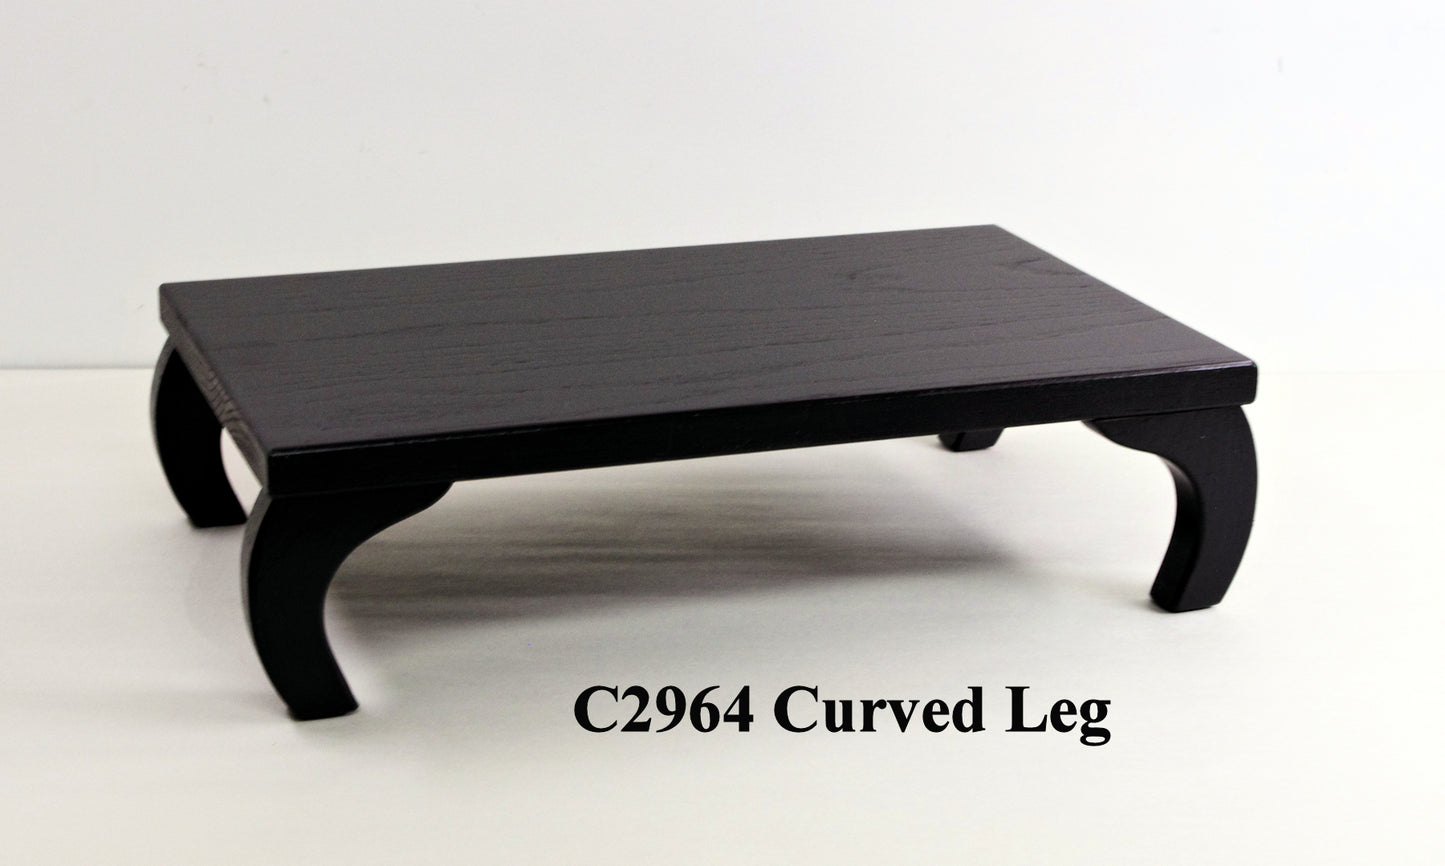 Bonsai Stand Curved Leg C2964 Made to Order 26" Length